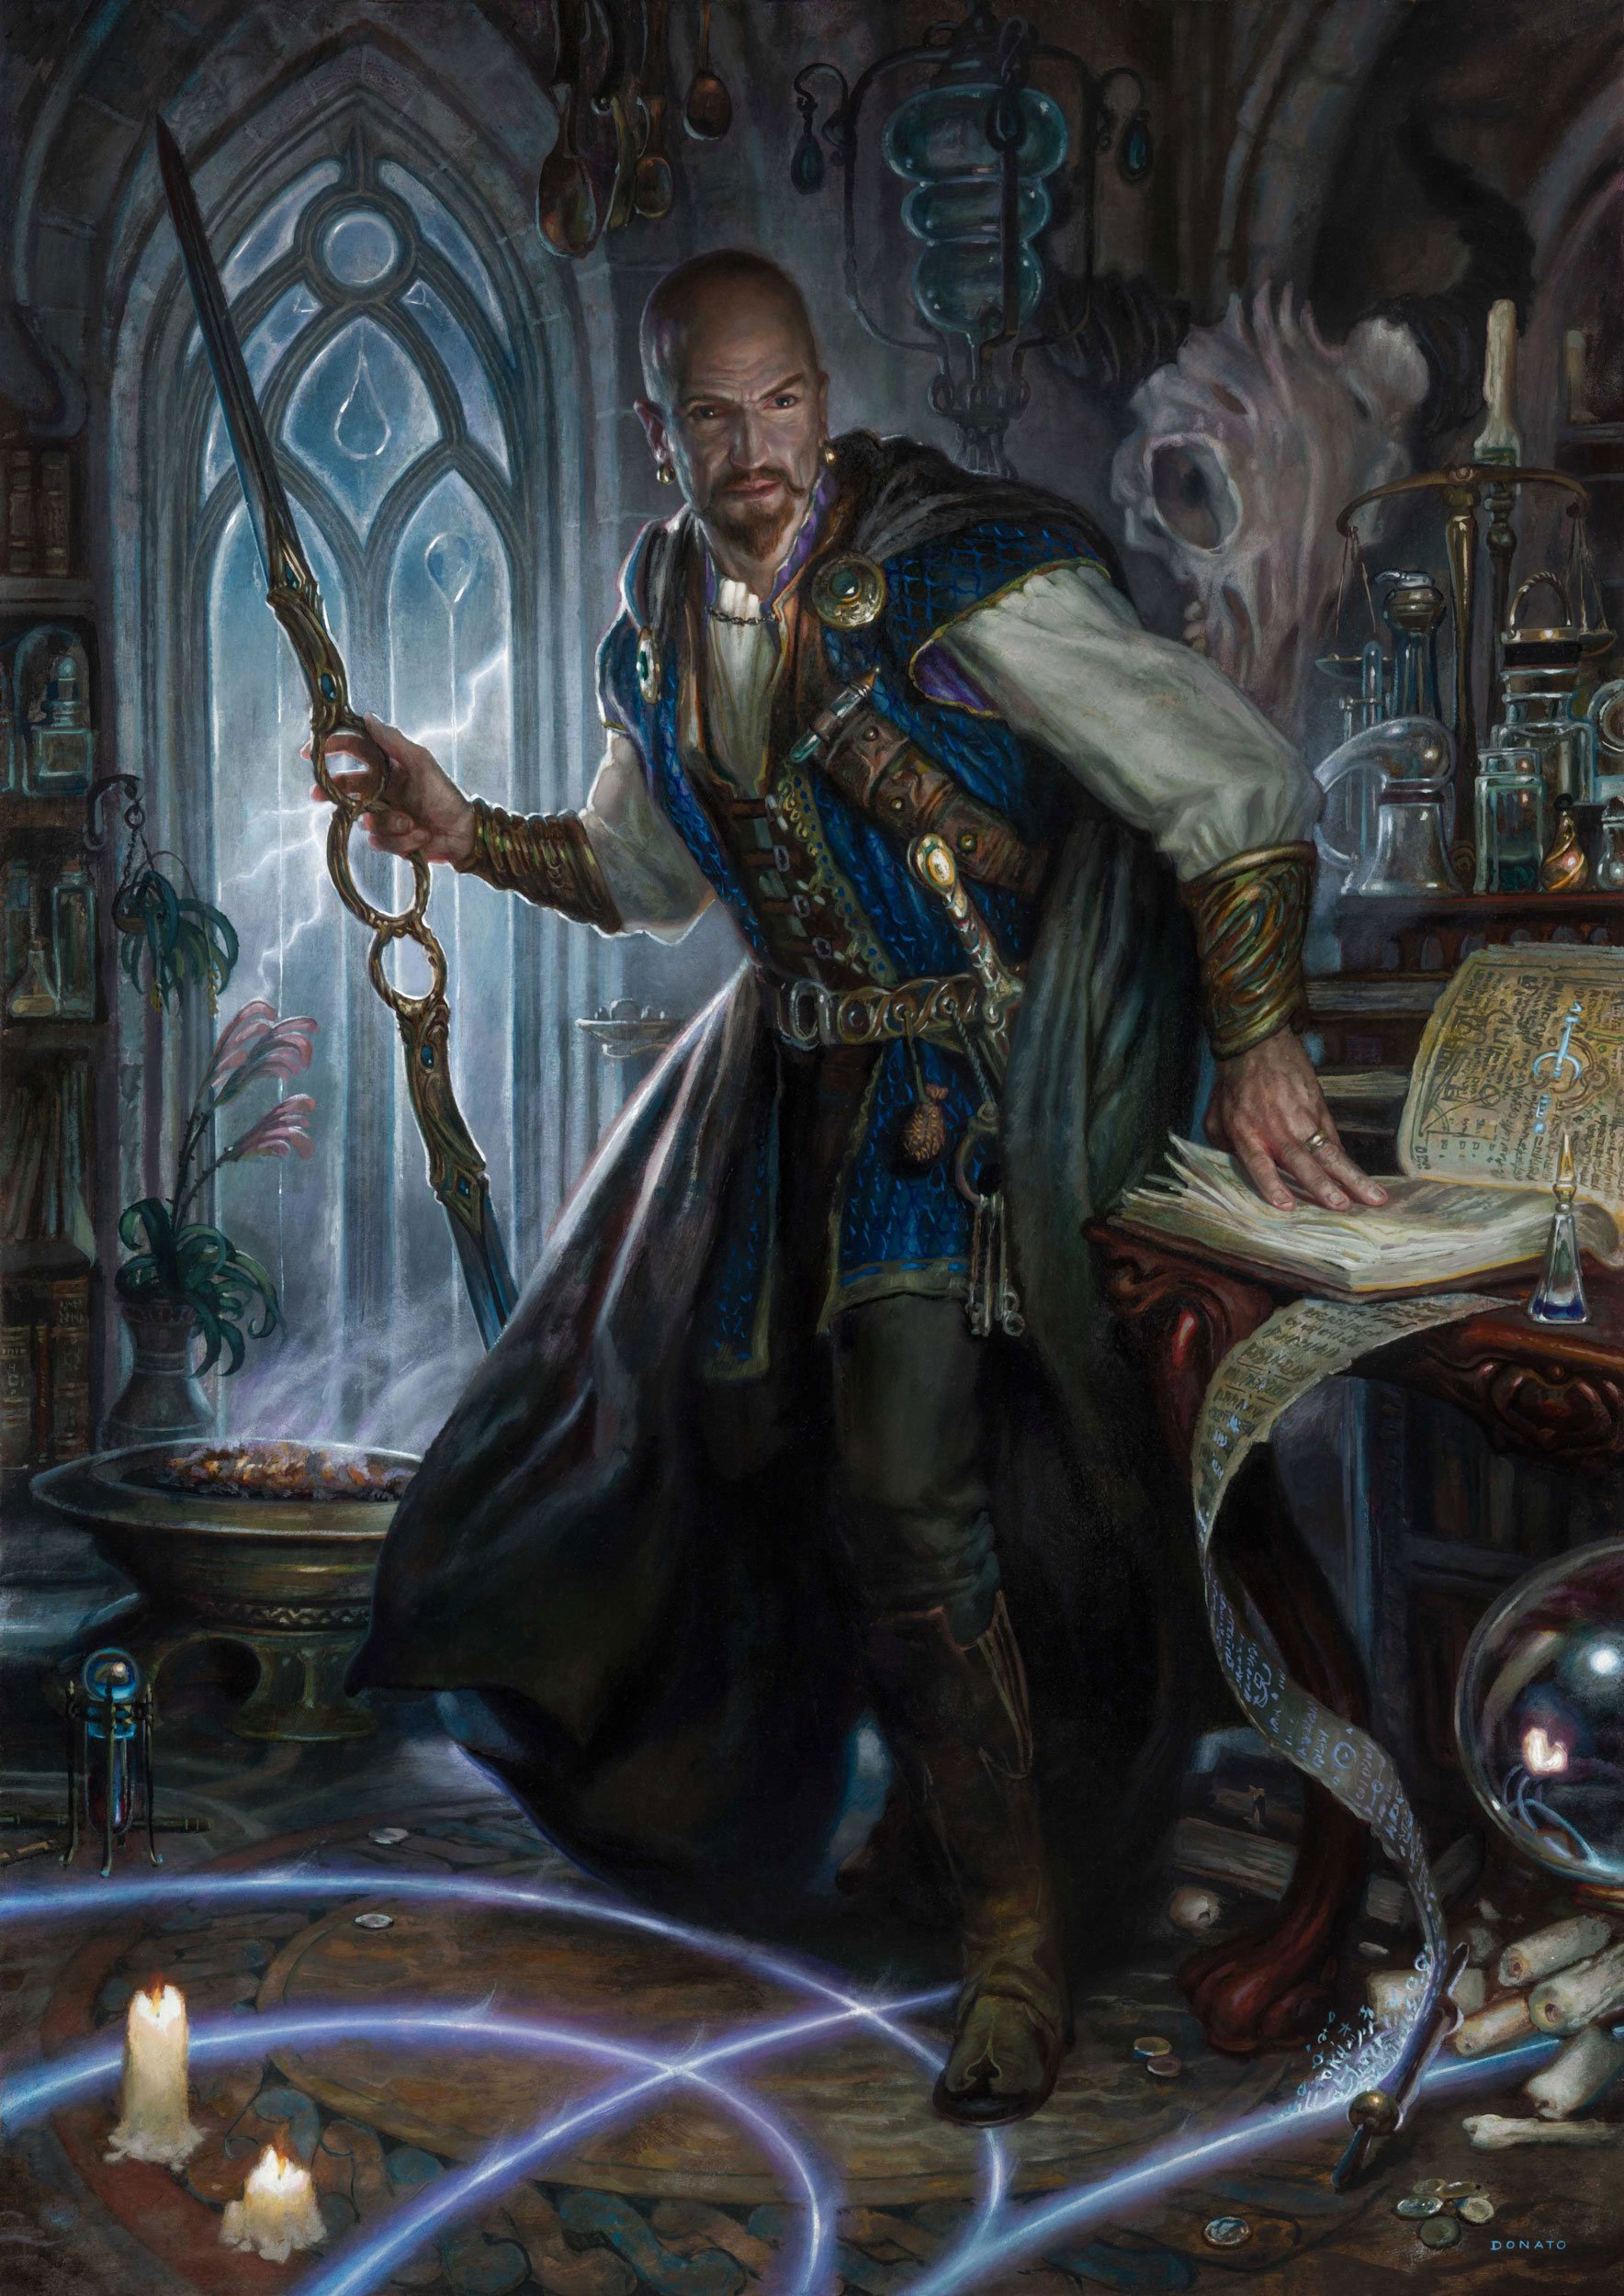 Mordenkainen the Wizard
Dungeons & Dragons
Adventures in the Forgotten Realms
34" x 25"  Oil on Panel 2020
private collection